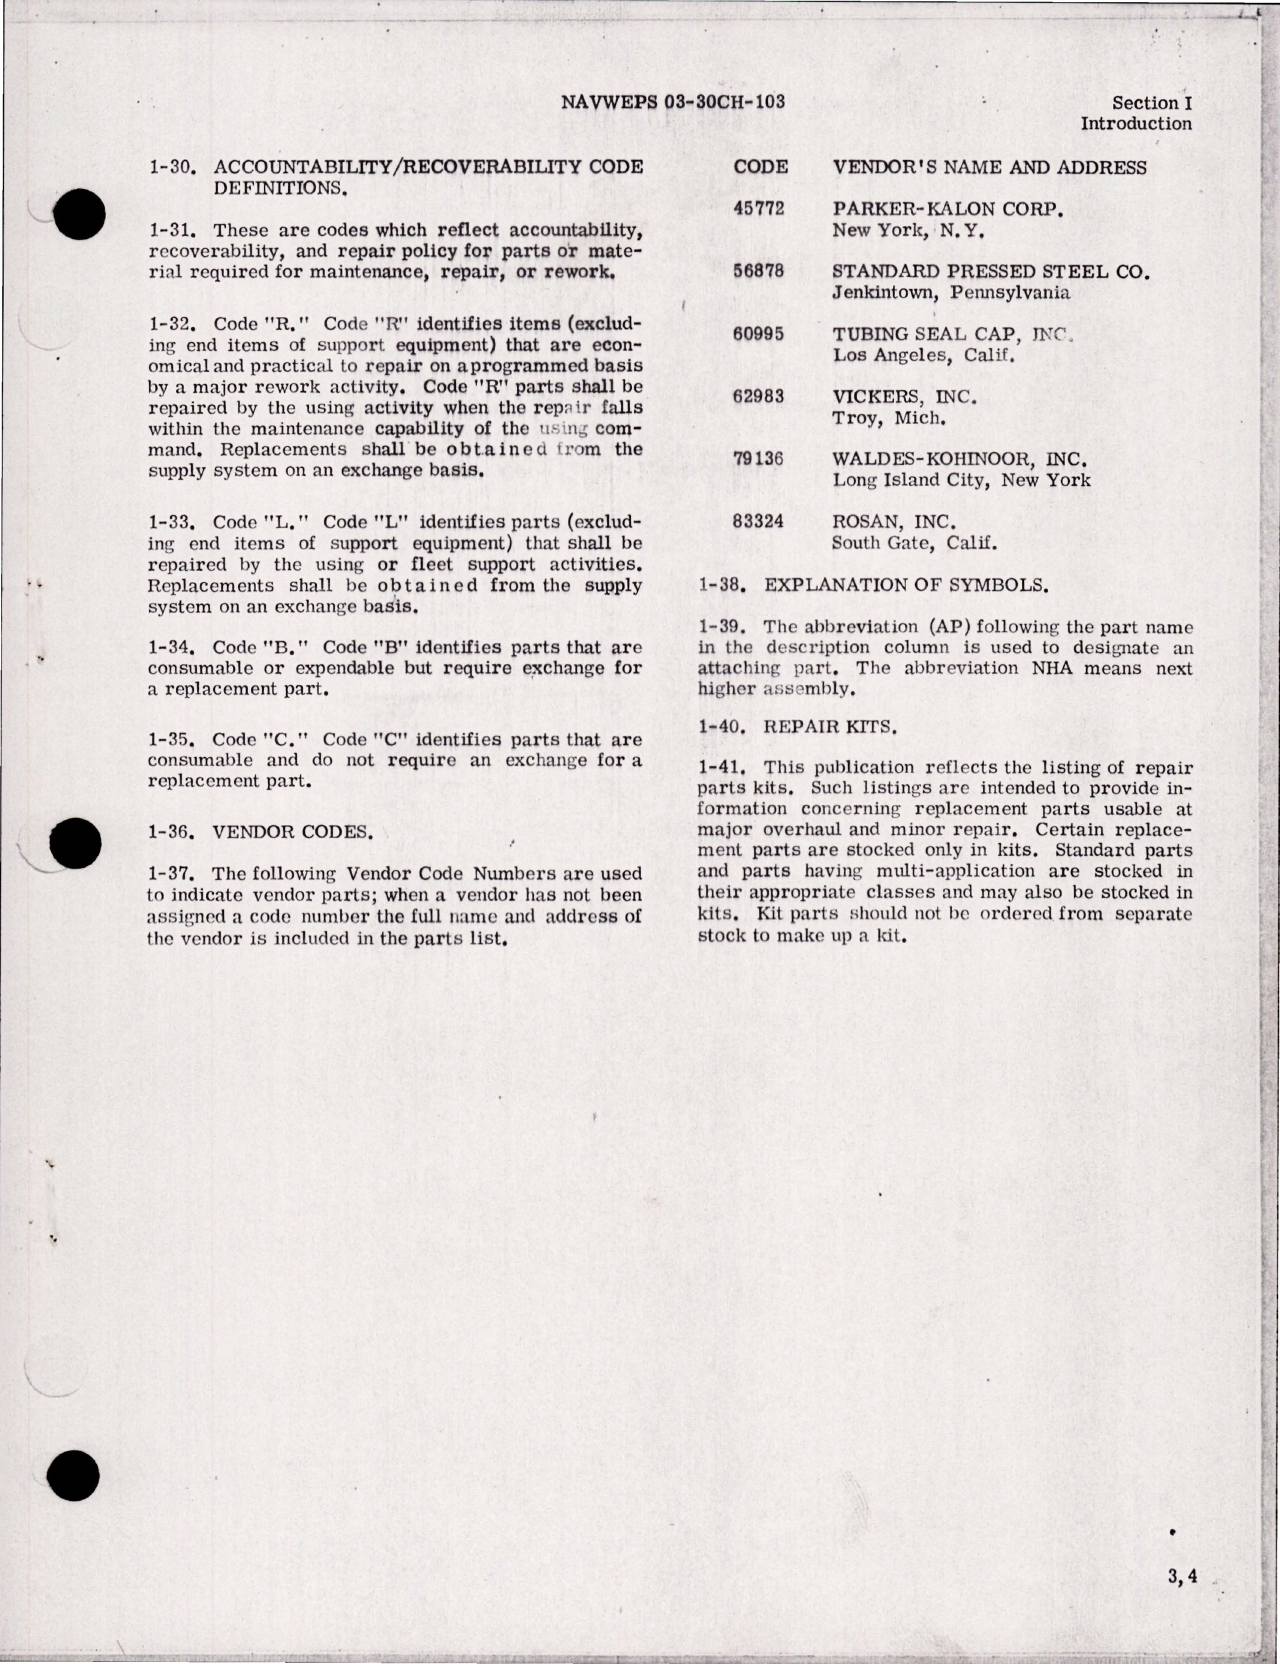 Sample page 5 from AirCorps Library document: Illustrated Parts Breakdown for Hydraulic Pump Assembly 